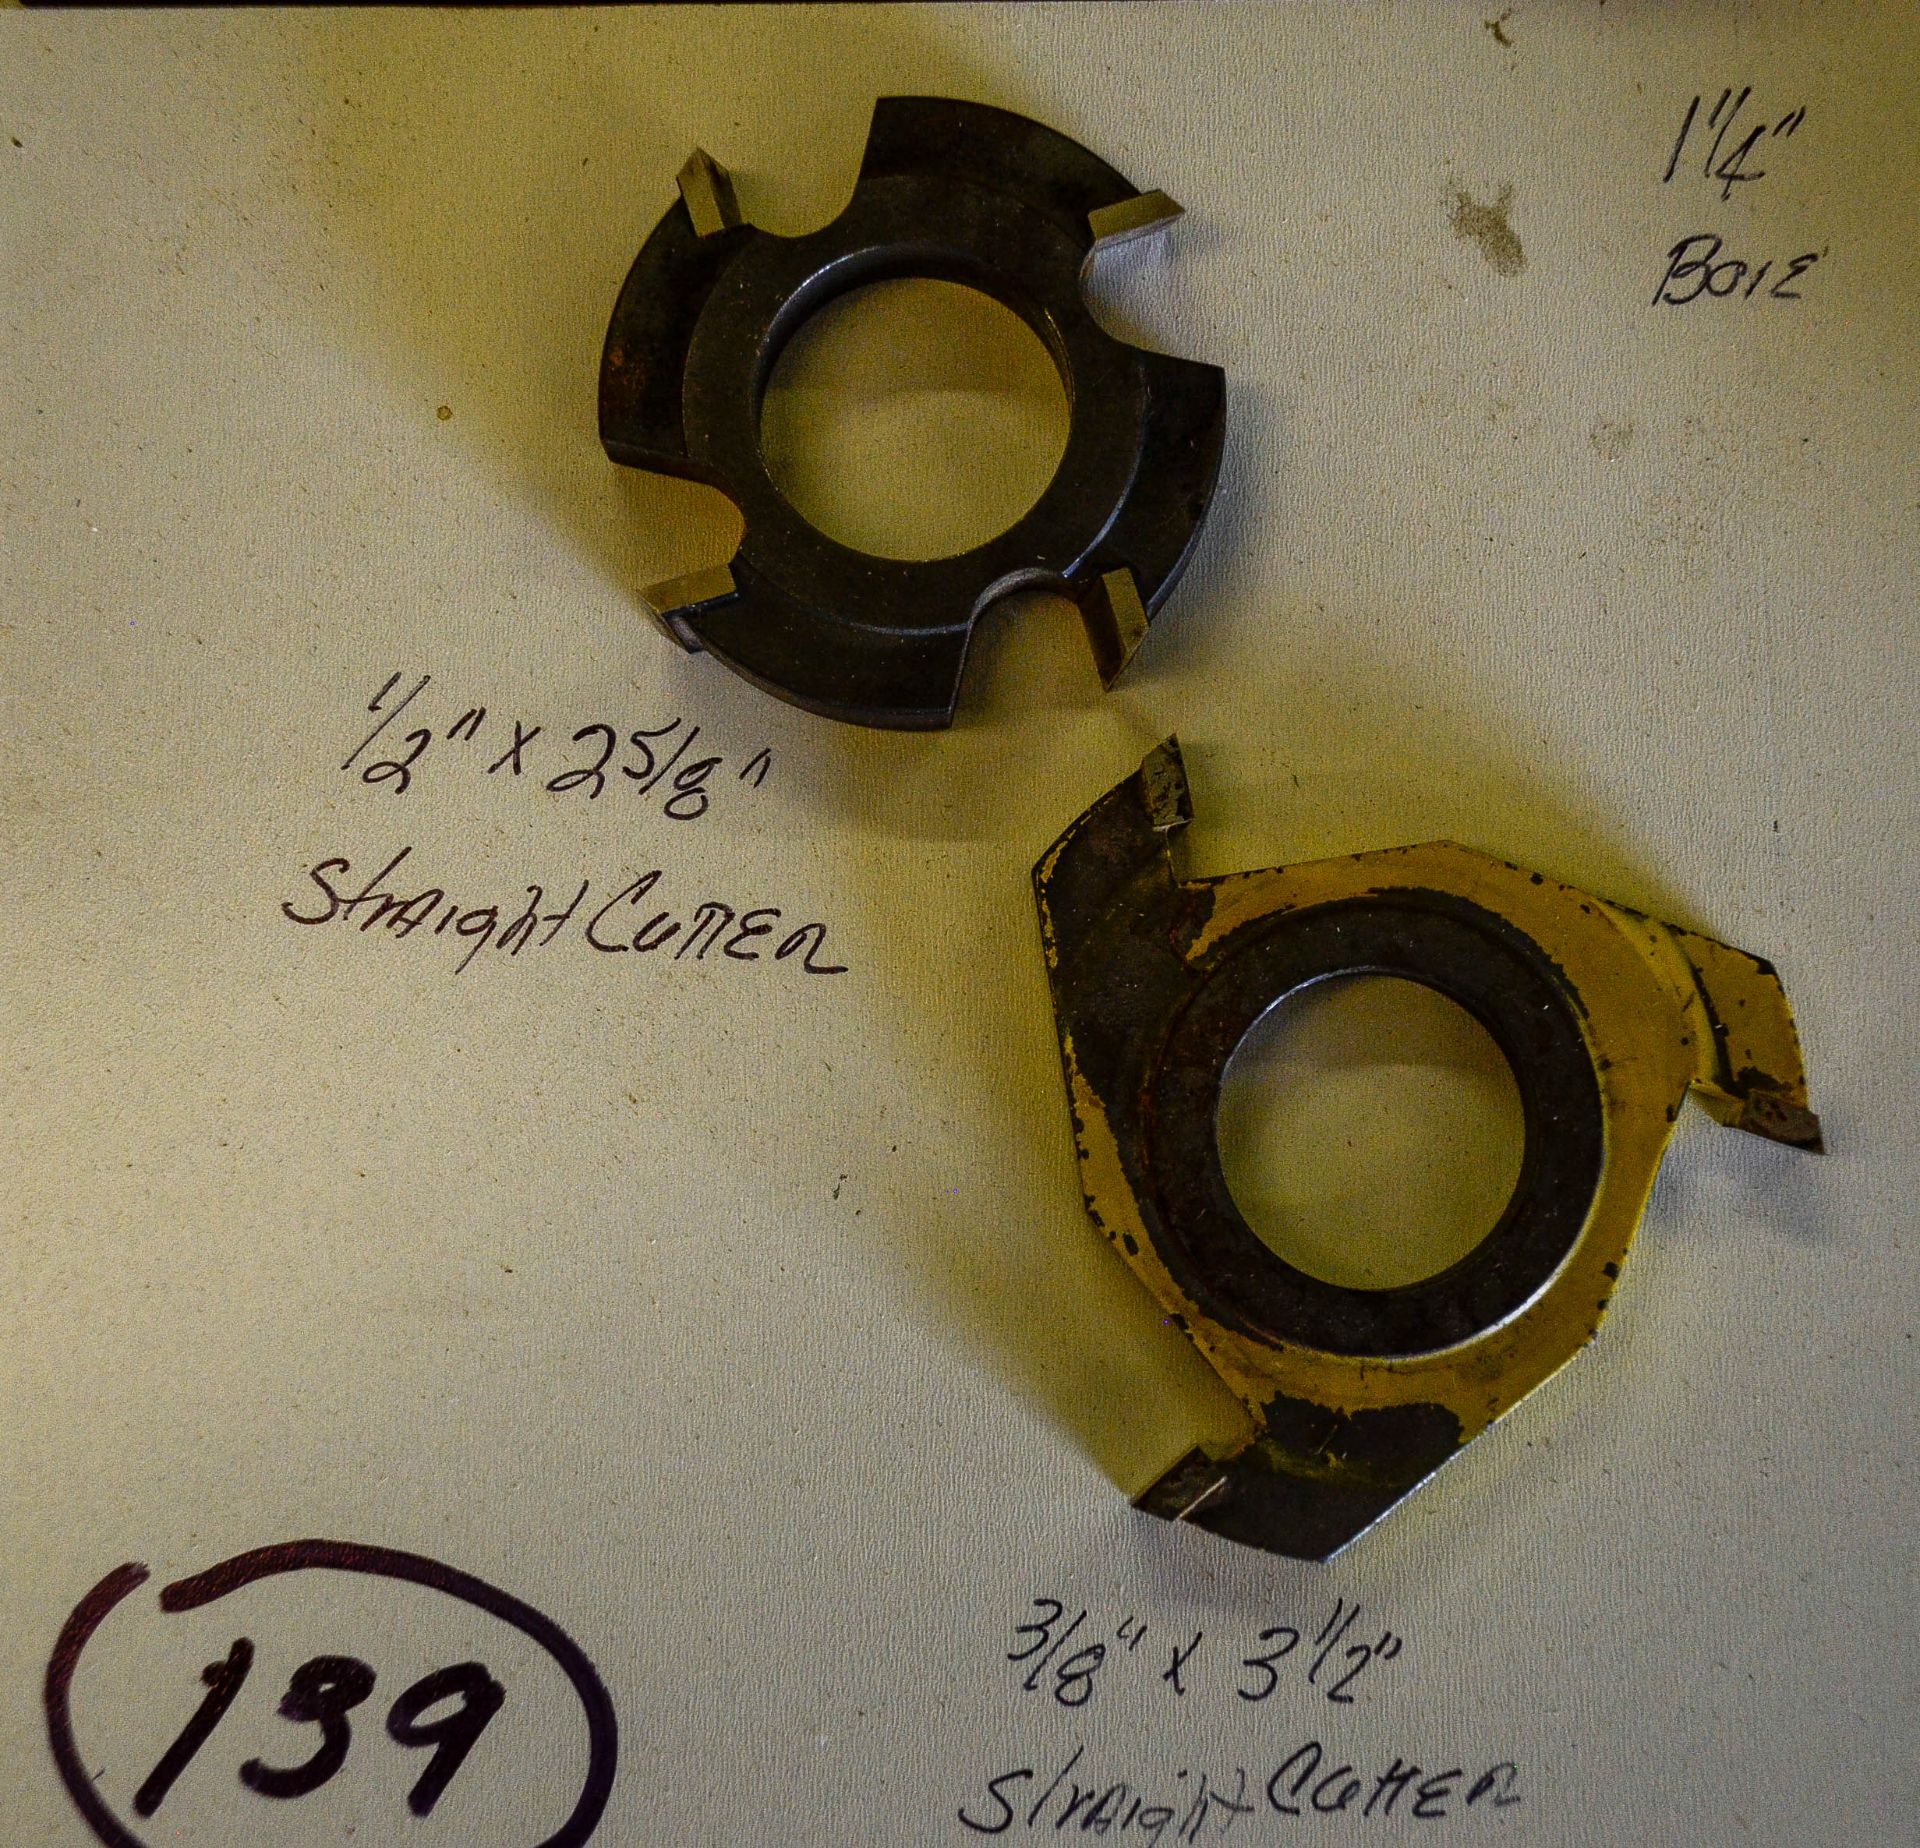 Shaper Cutters, (2) Straight Cutters: (1) 1/2" x 2-5/8" , (1) 3/8" x 3-1/2", Both 1-1/4" Bore, S